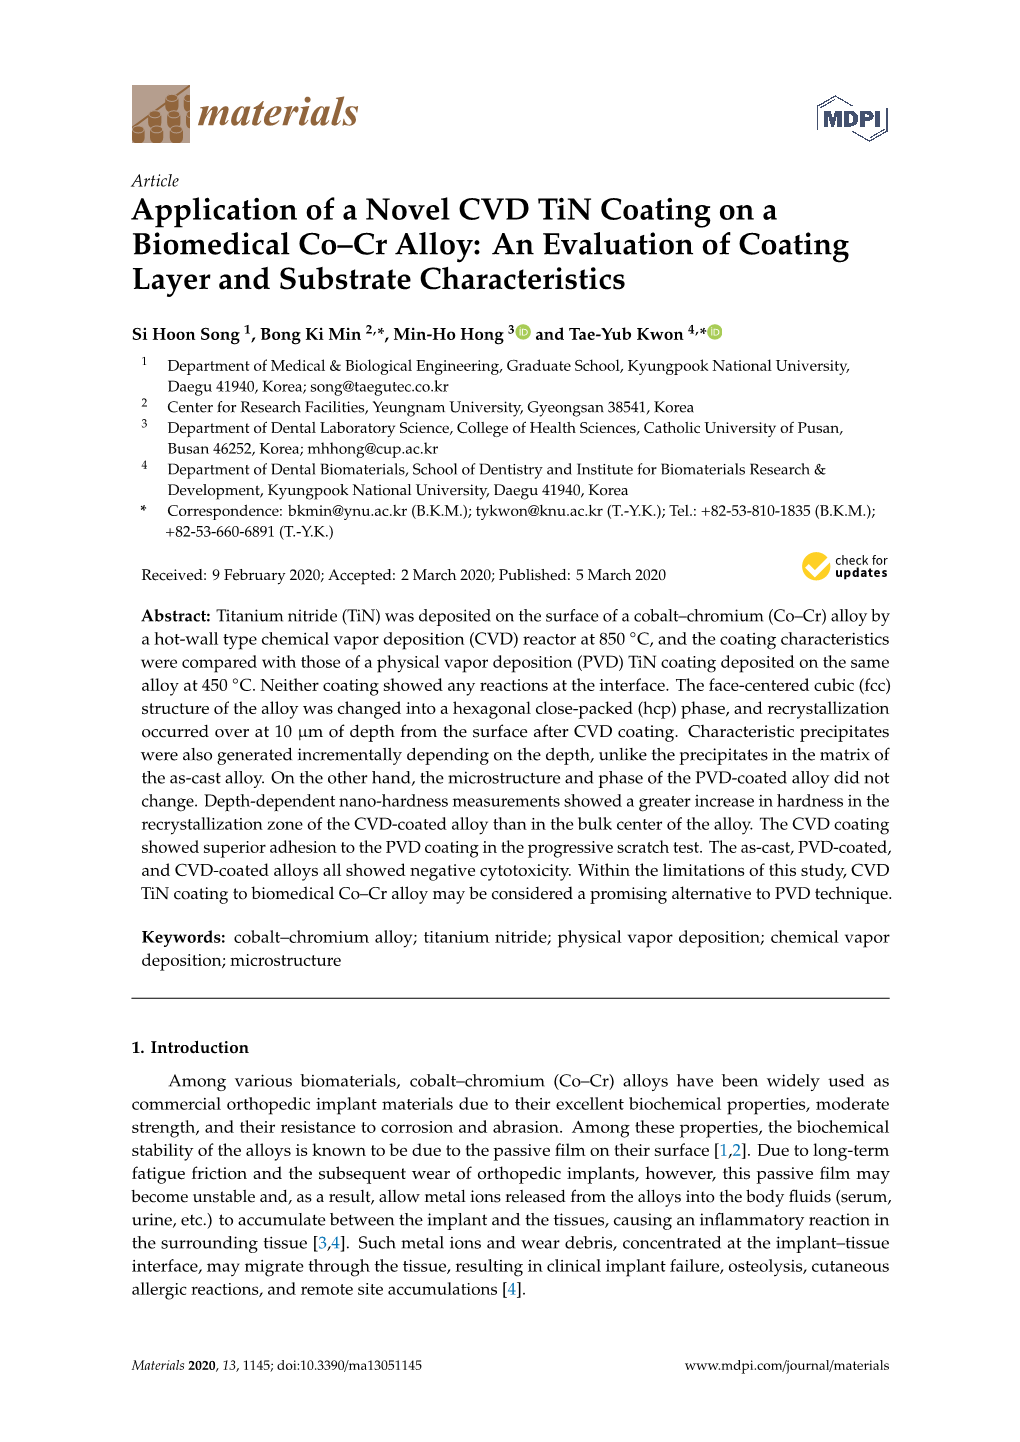 Application of a Novel CVD Tin Coating on a Biomedical Co–Cr Alloy: an Evaluation of Coating Layer and Substrate Characteristics